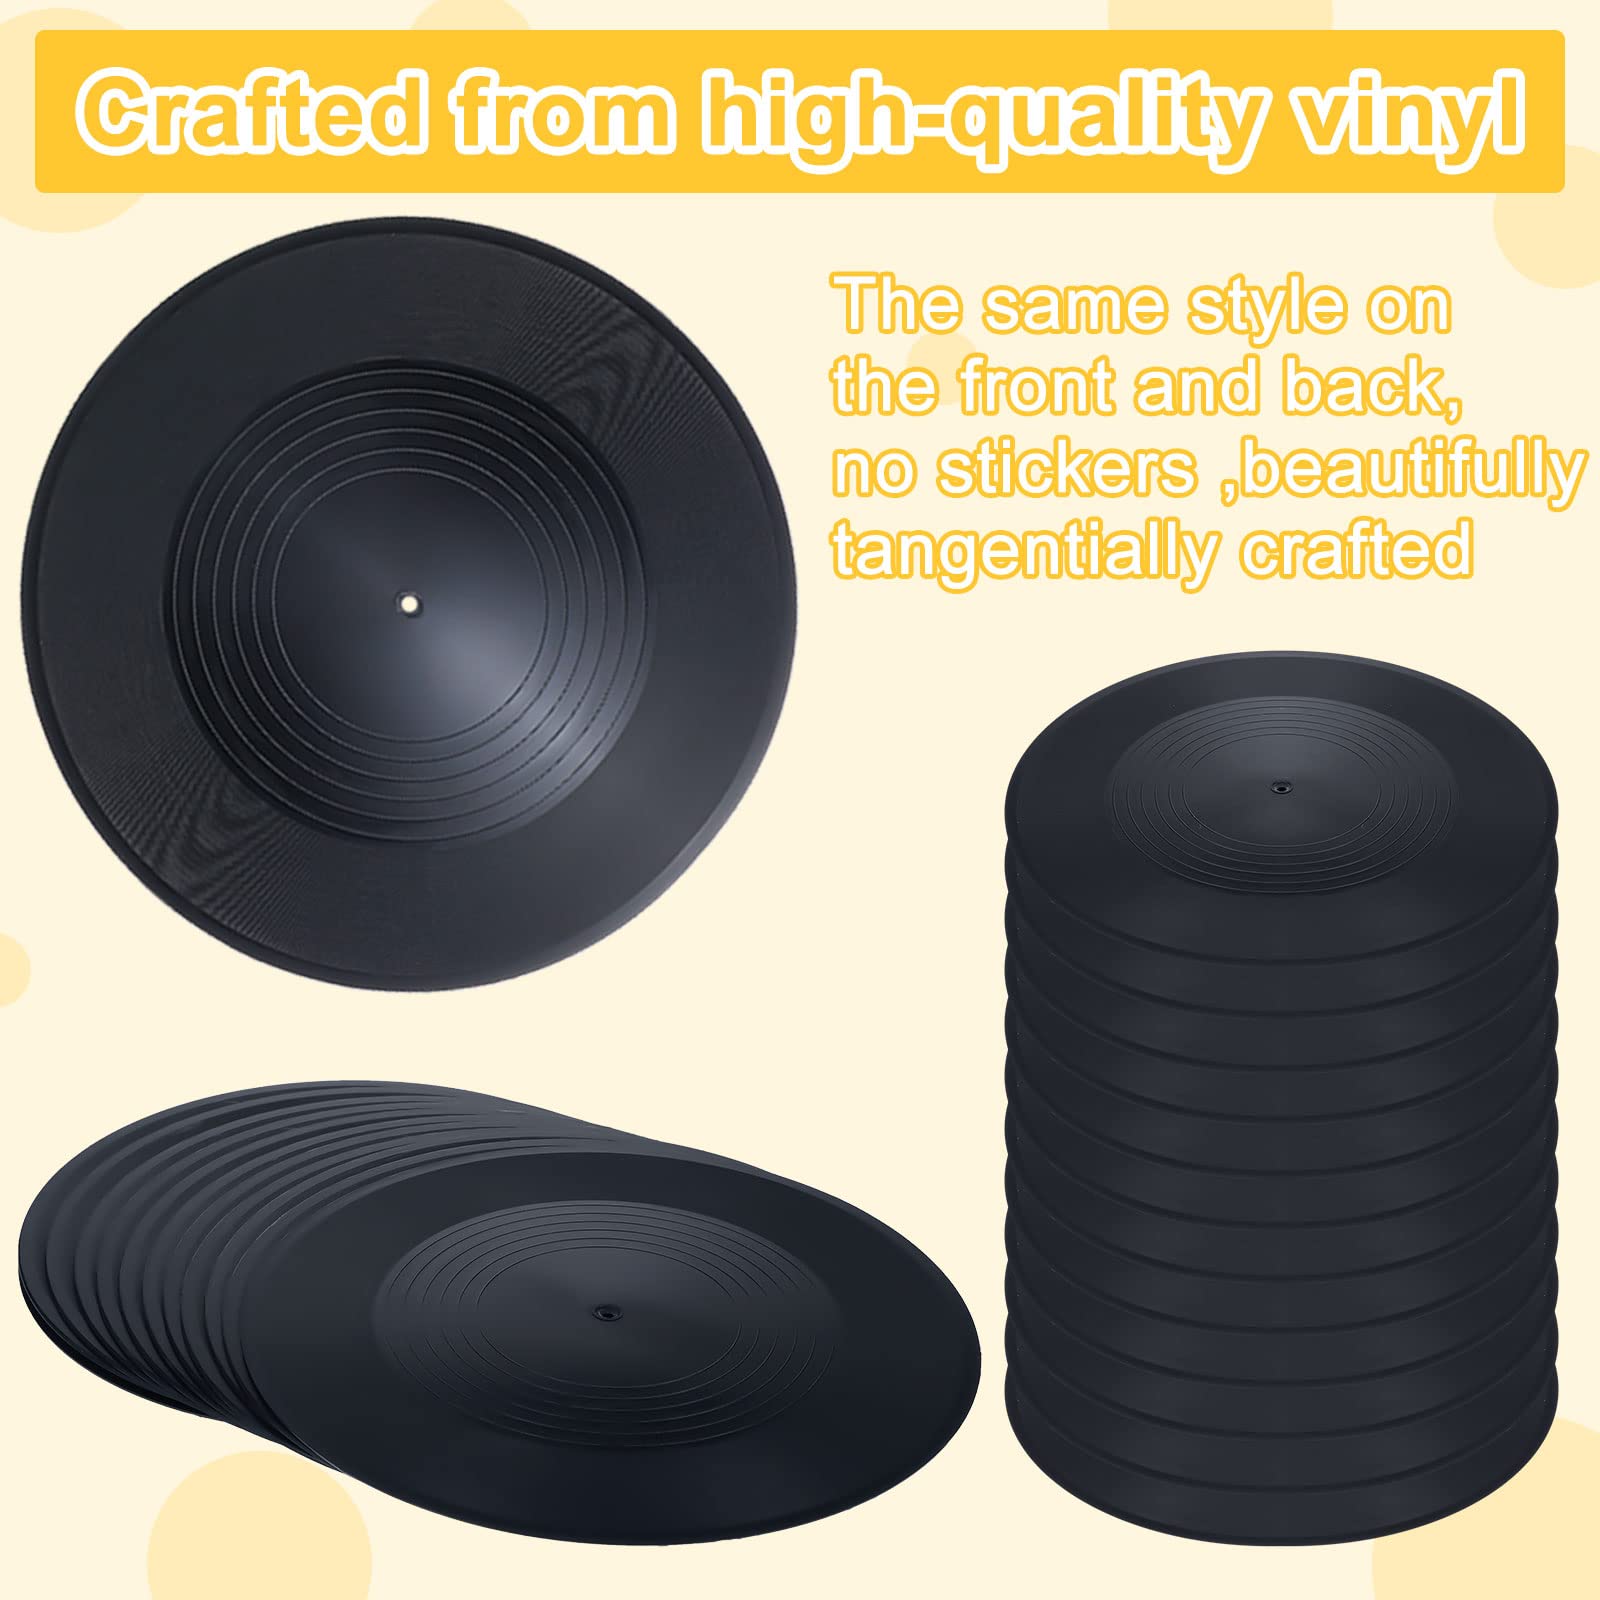 20 Pieces 12 Inch Blank Vinyl Records Vintage Fake Records Decorations for  Wall Aesthetic Home Studio Room, Discs Hip Hop Rock 70s 80s 90s Retro Decor